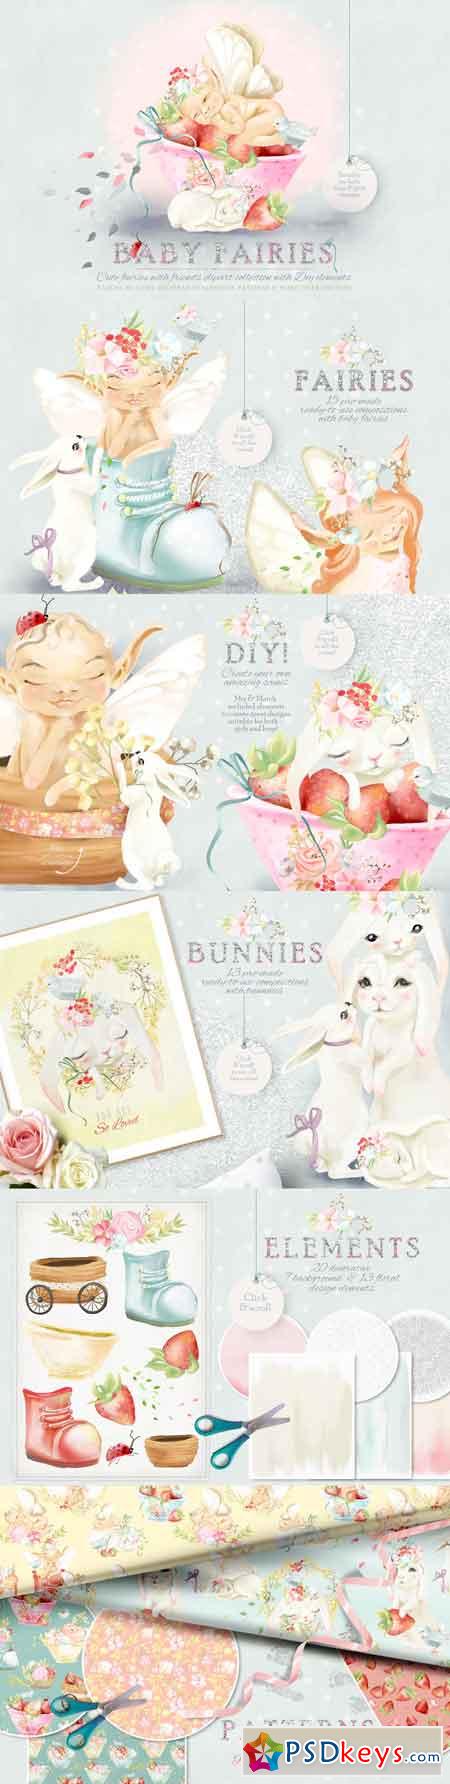 Baby Fairies Clipart Collection 2770171